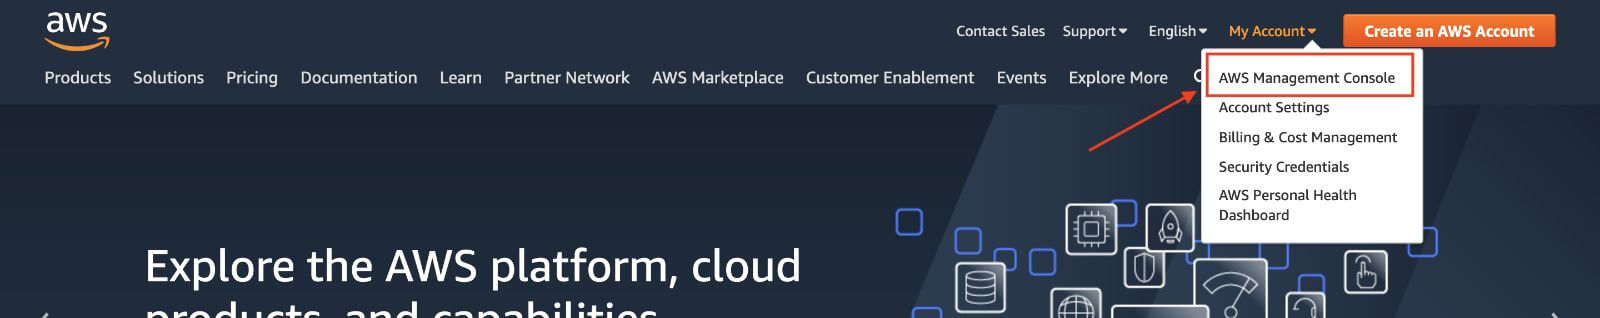 aws where to find the management console